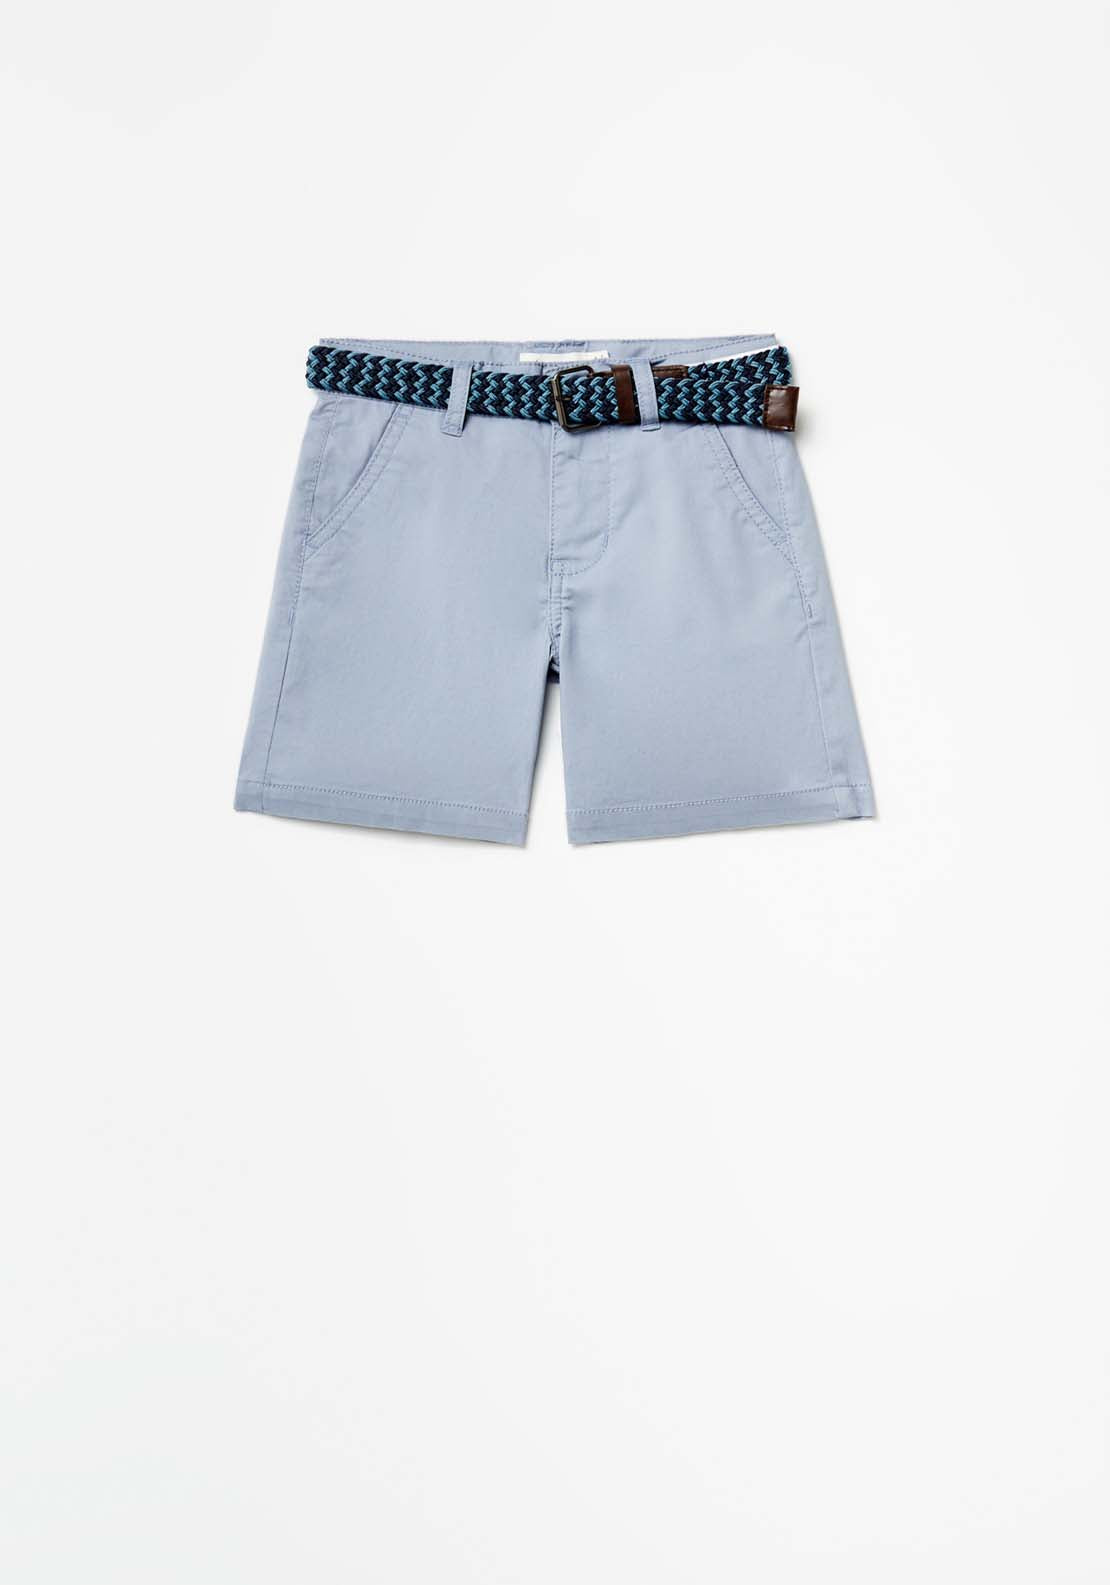 Sfera Formal Shorts With Belt - Blue 3 Shaws Department Stores